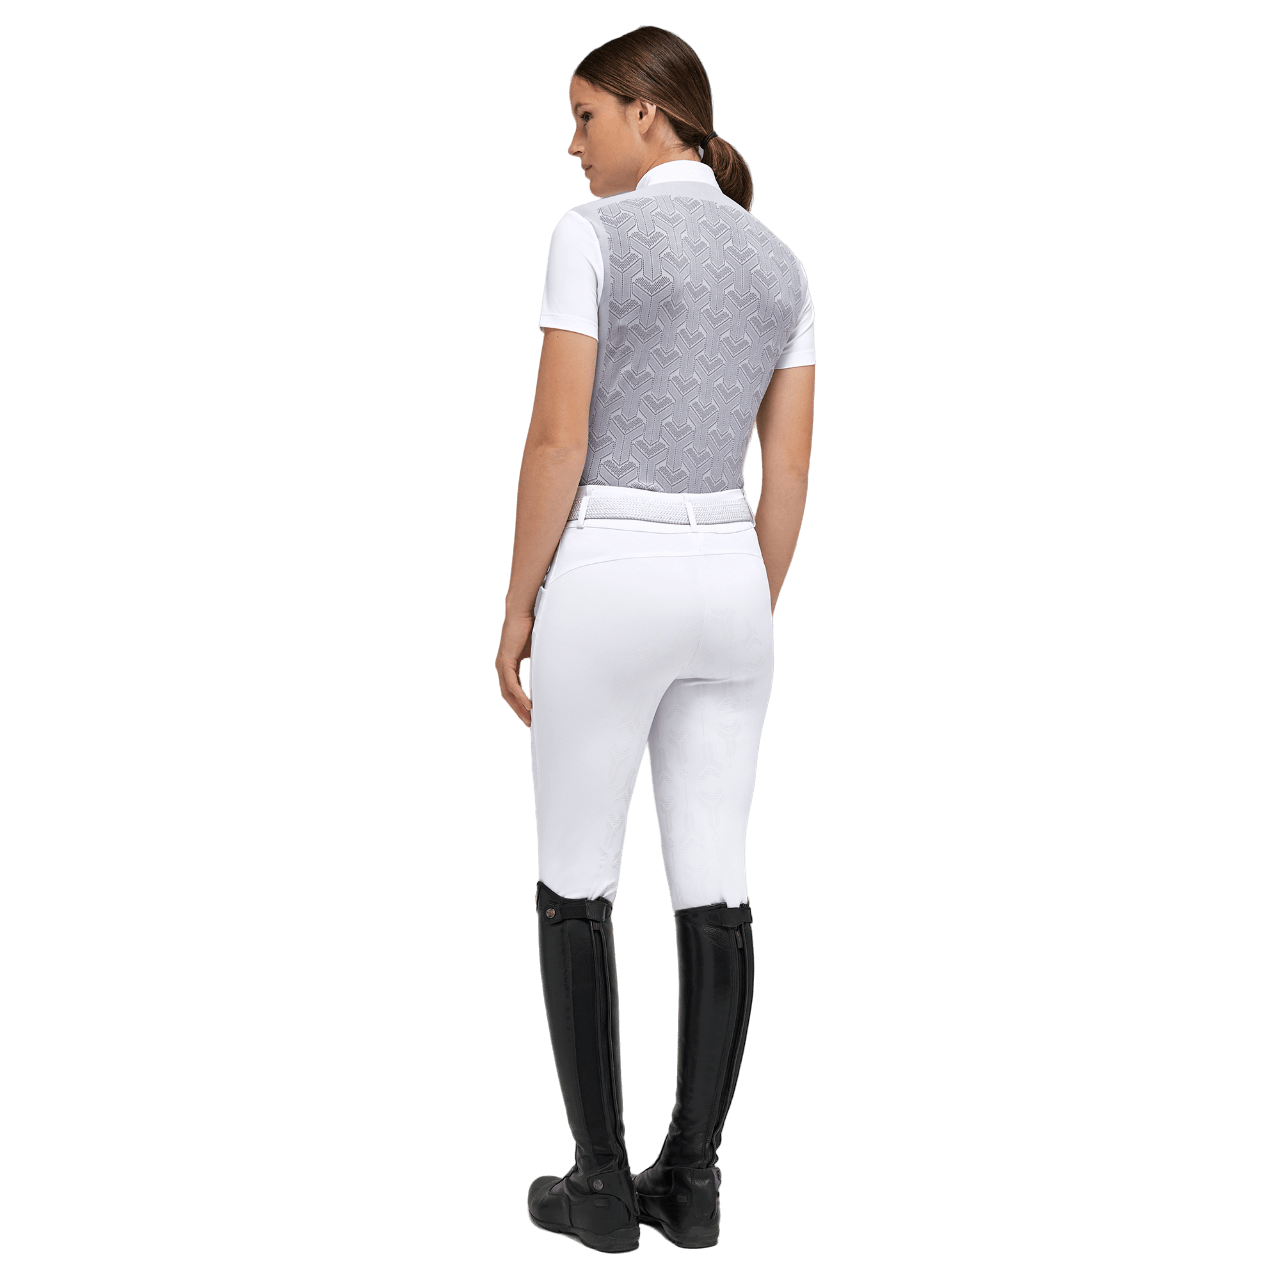 This women's competition shirt in technical jersey from the Revolution line has short sleeves and a technical jersey on the back.